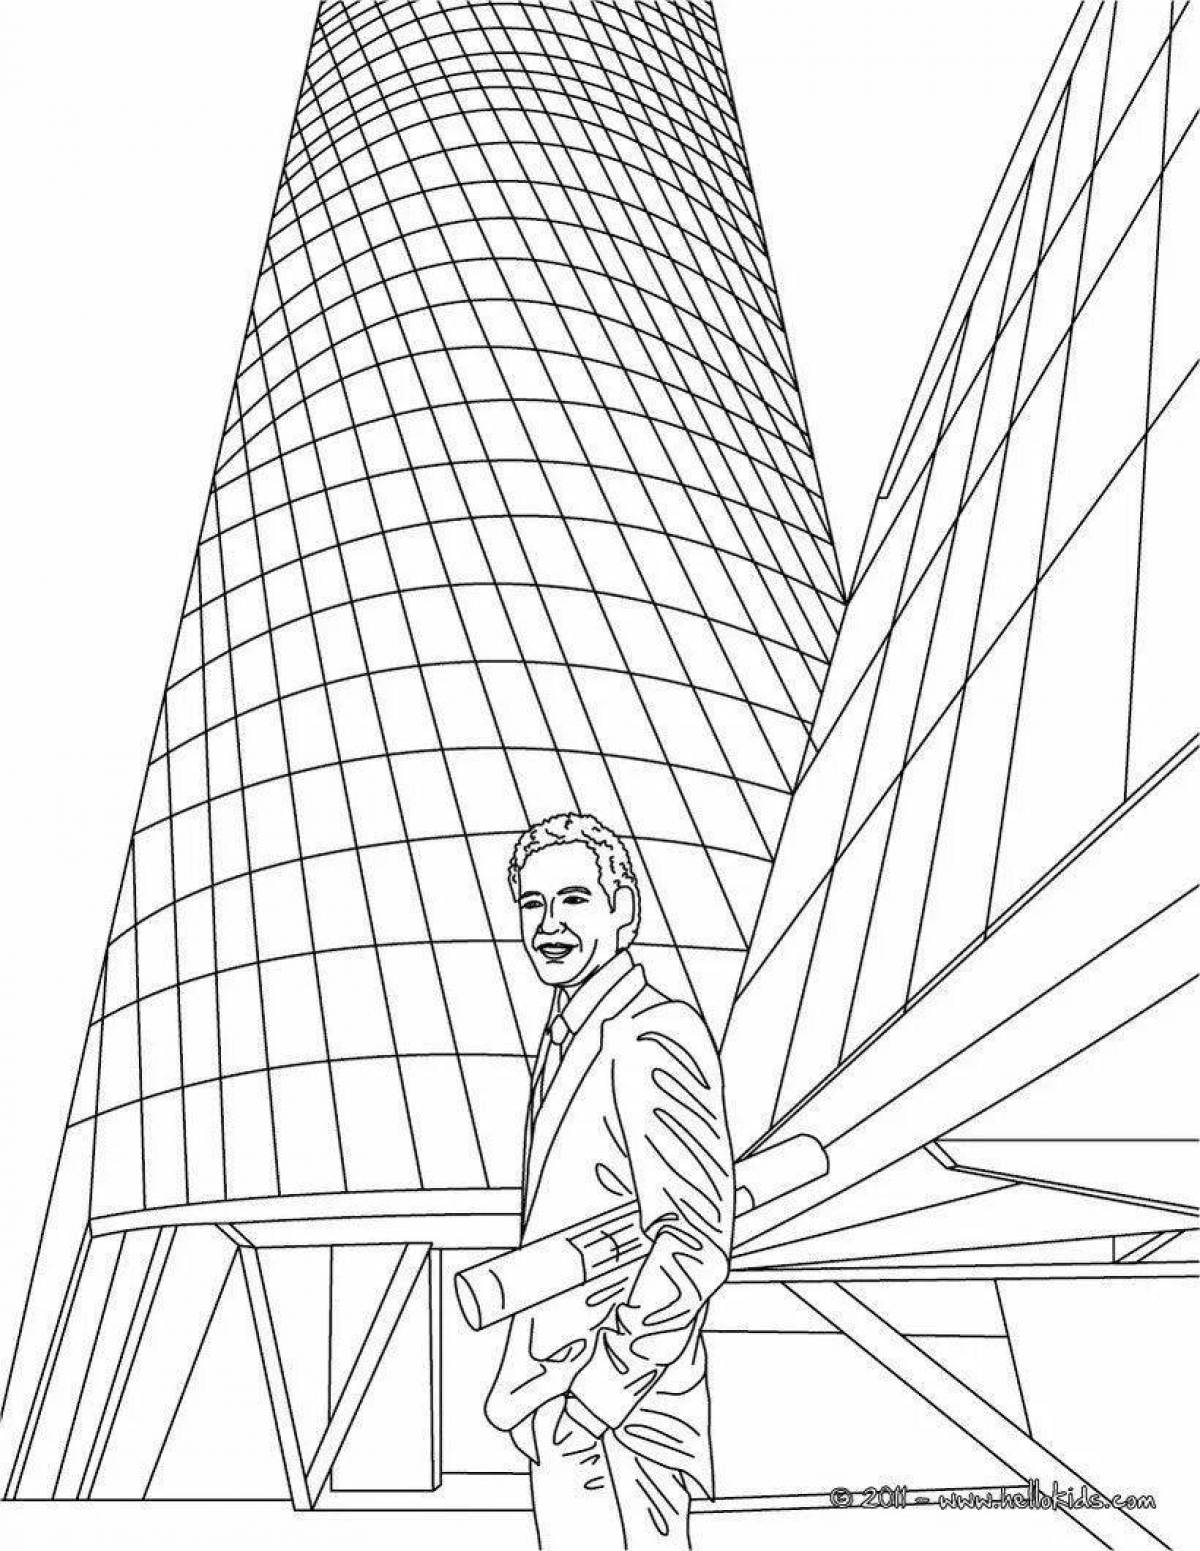 Awesome skyscraper coloring page